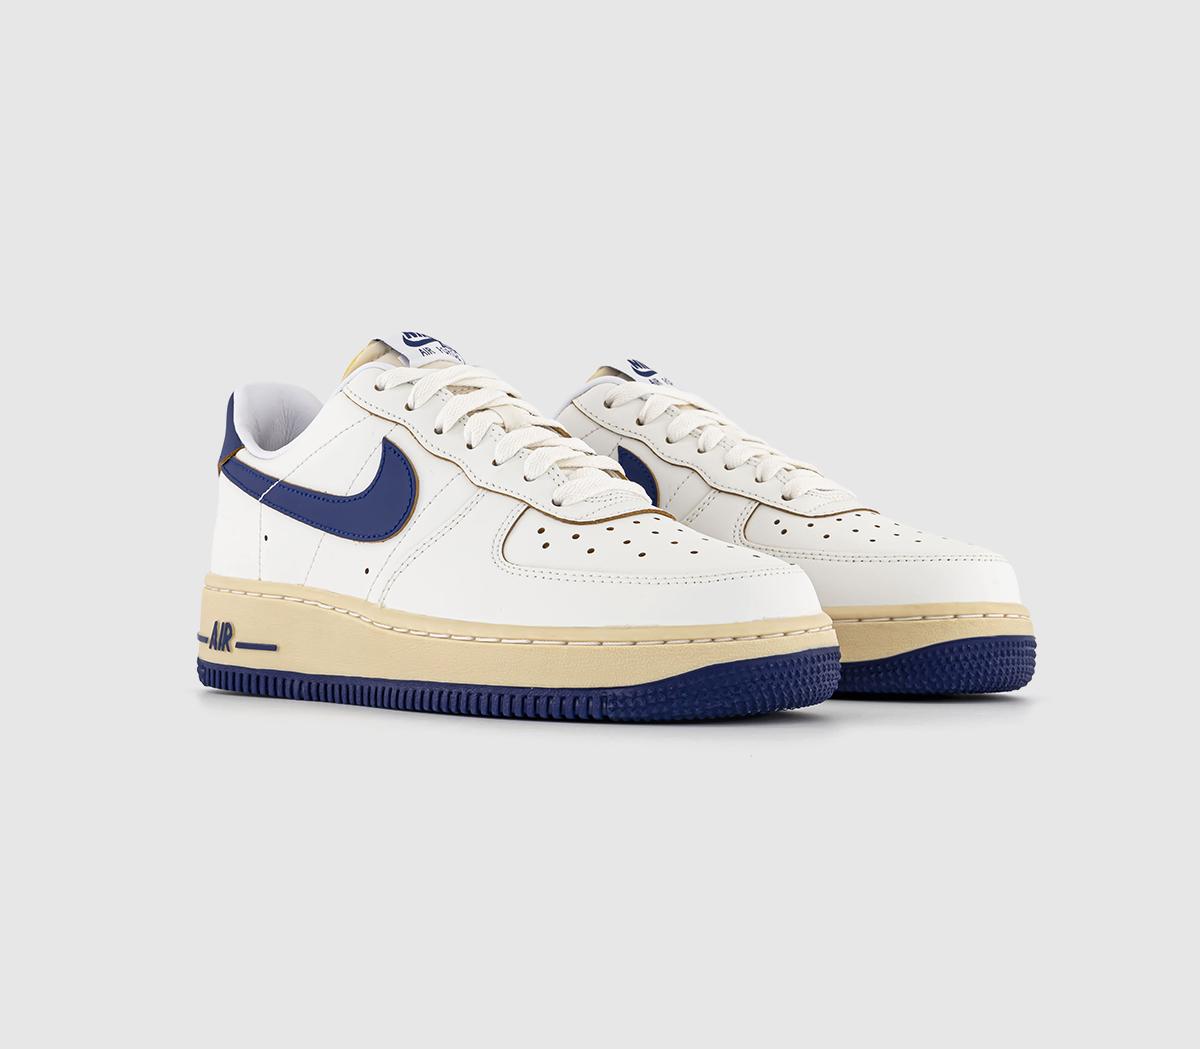 Nike Womens Air Force 1 07 Trainers Sail Deep Royal Blue Pale Vanilla Gold Suede White, 9.5